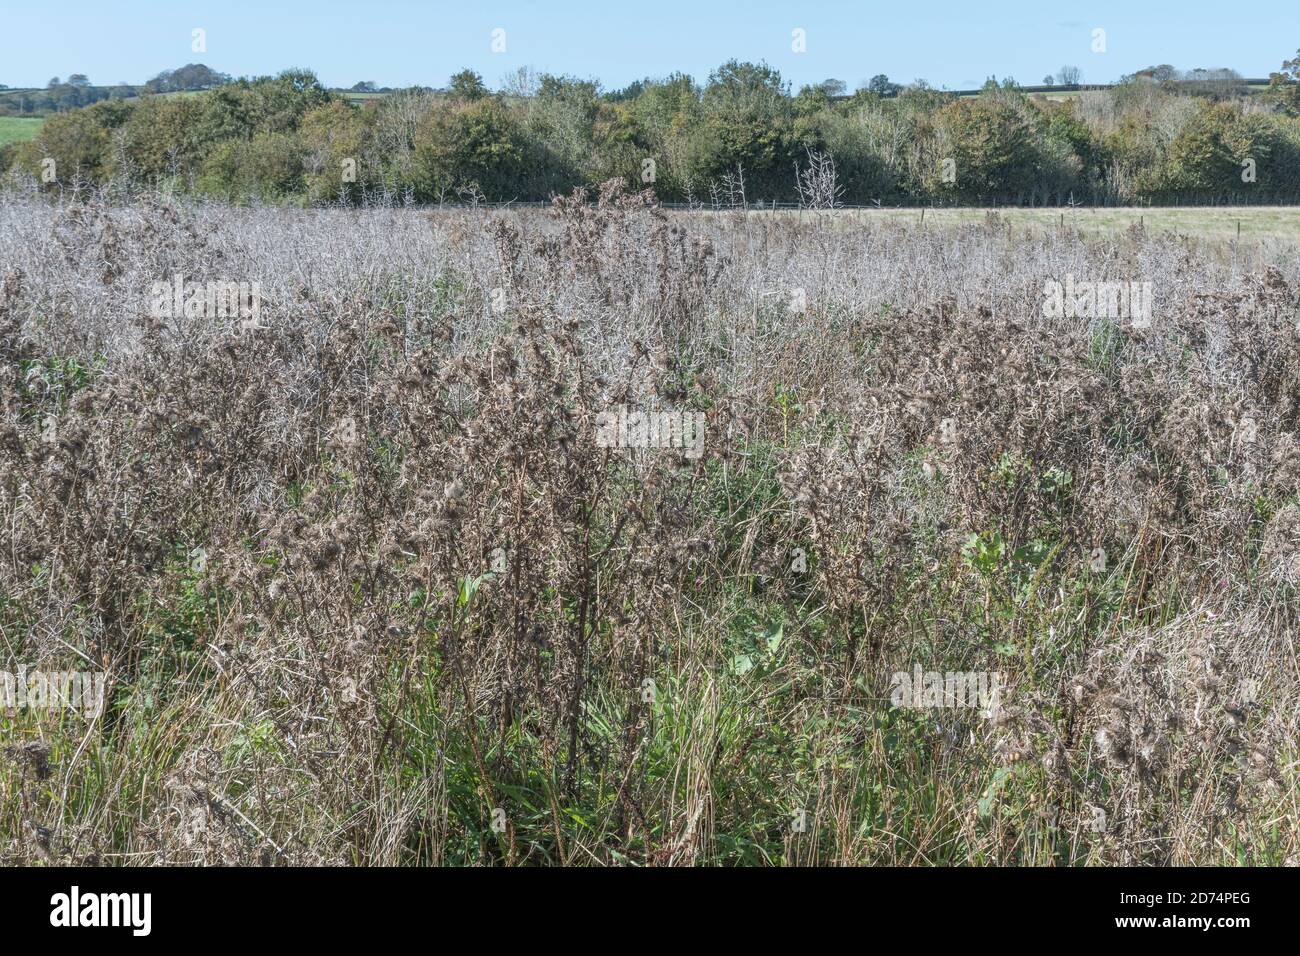 Field overgrown by a mass of common agricultural weeds including Spear Thistle / Cirsium vulgare. For invasive weeds or plant, problem weeds. Stock Photo